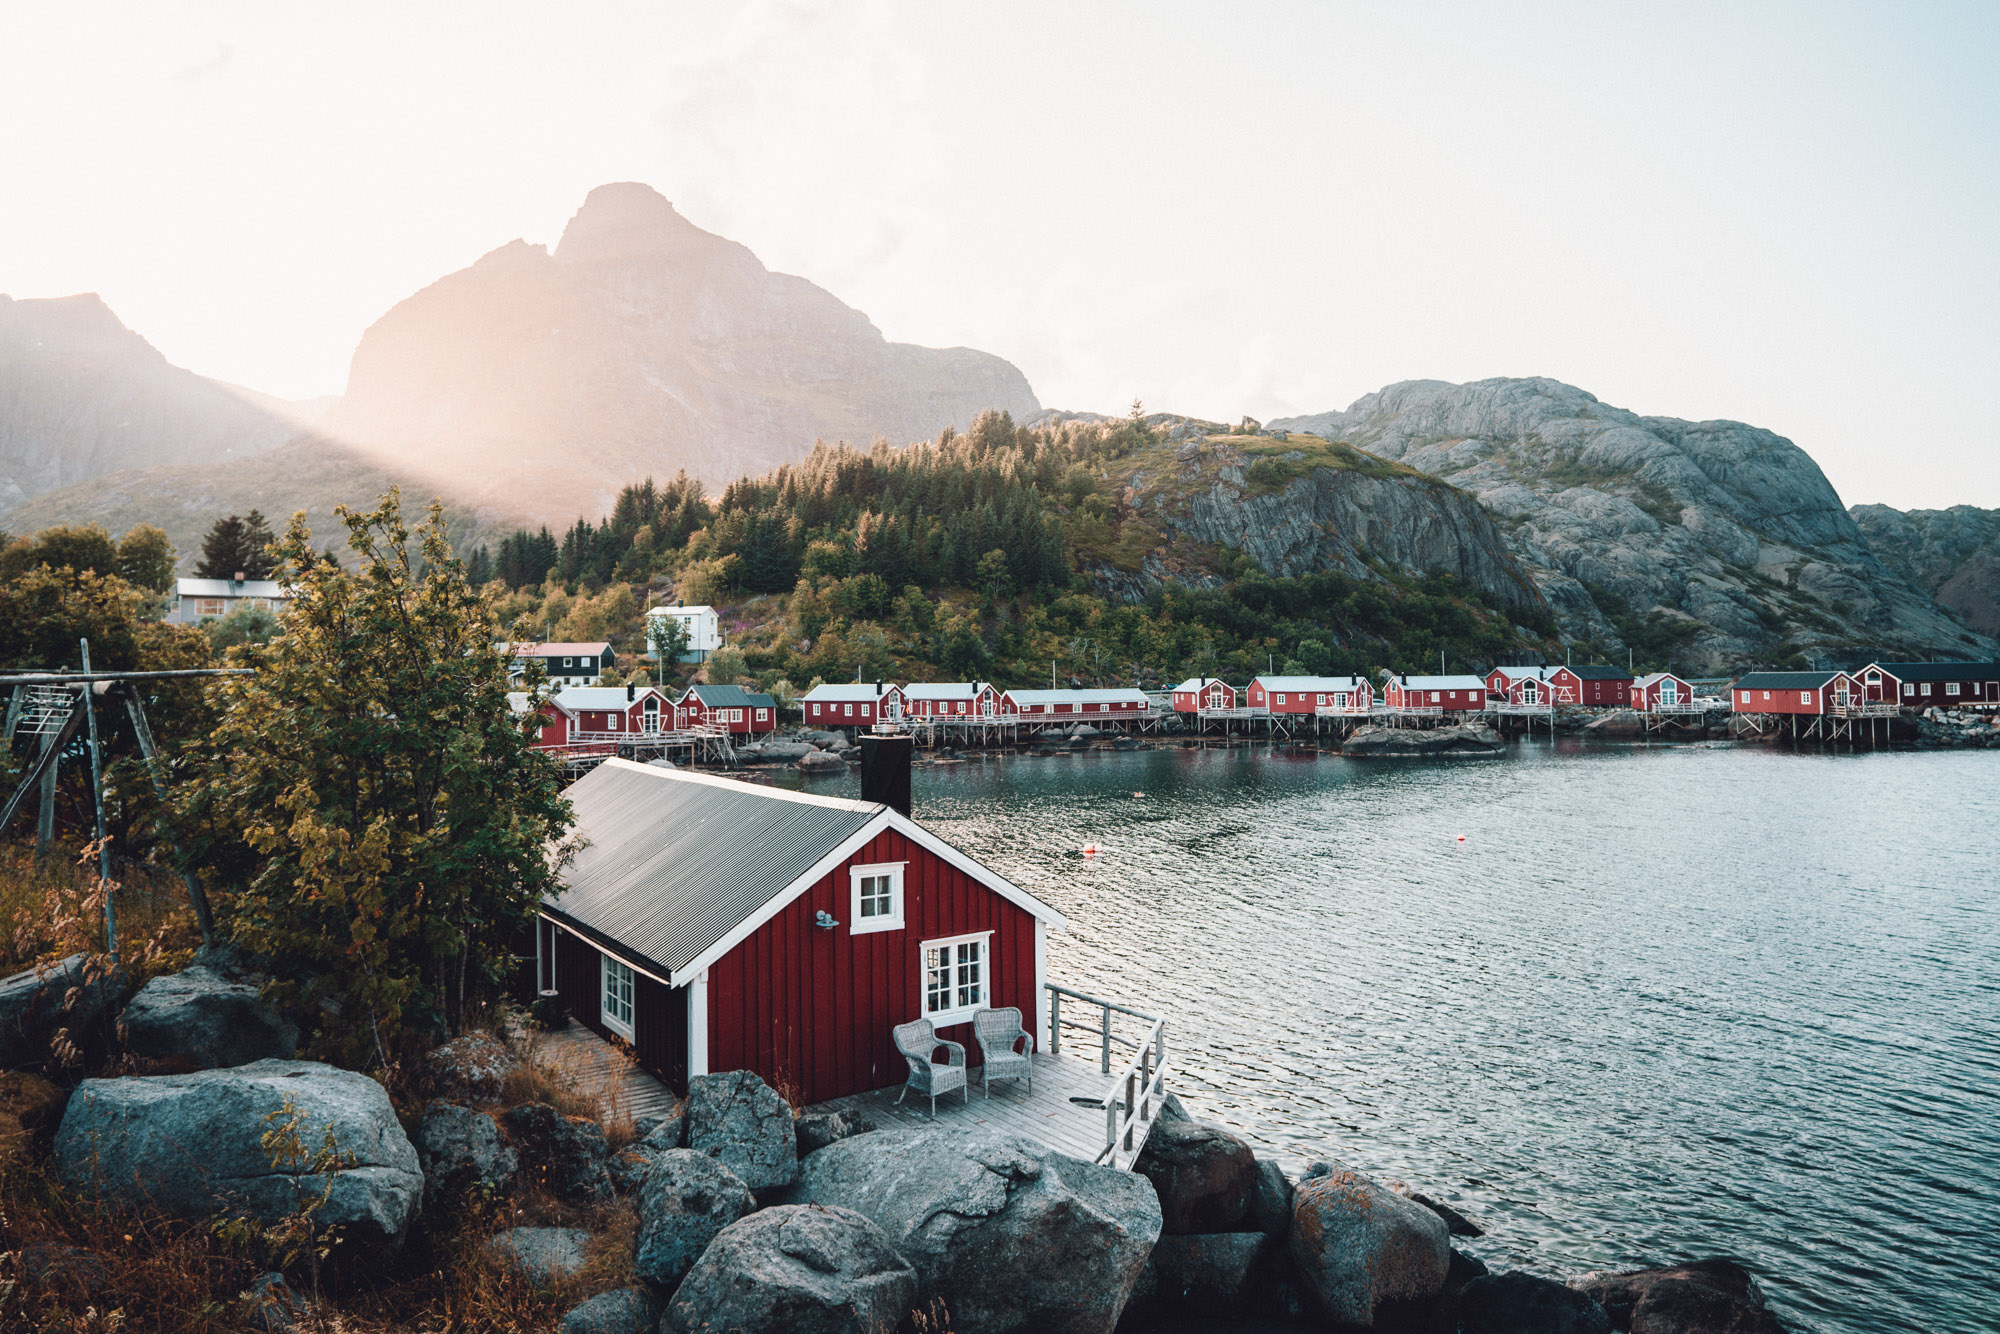 Lofoten Hotel in Norway Nusfjord Arctic Resort Traditional Fishermen Red Cabin with a Fjord View - Find Us Lost